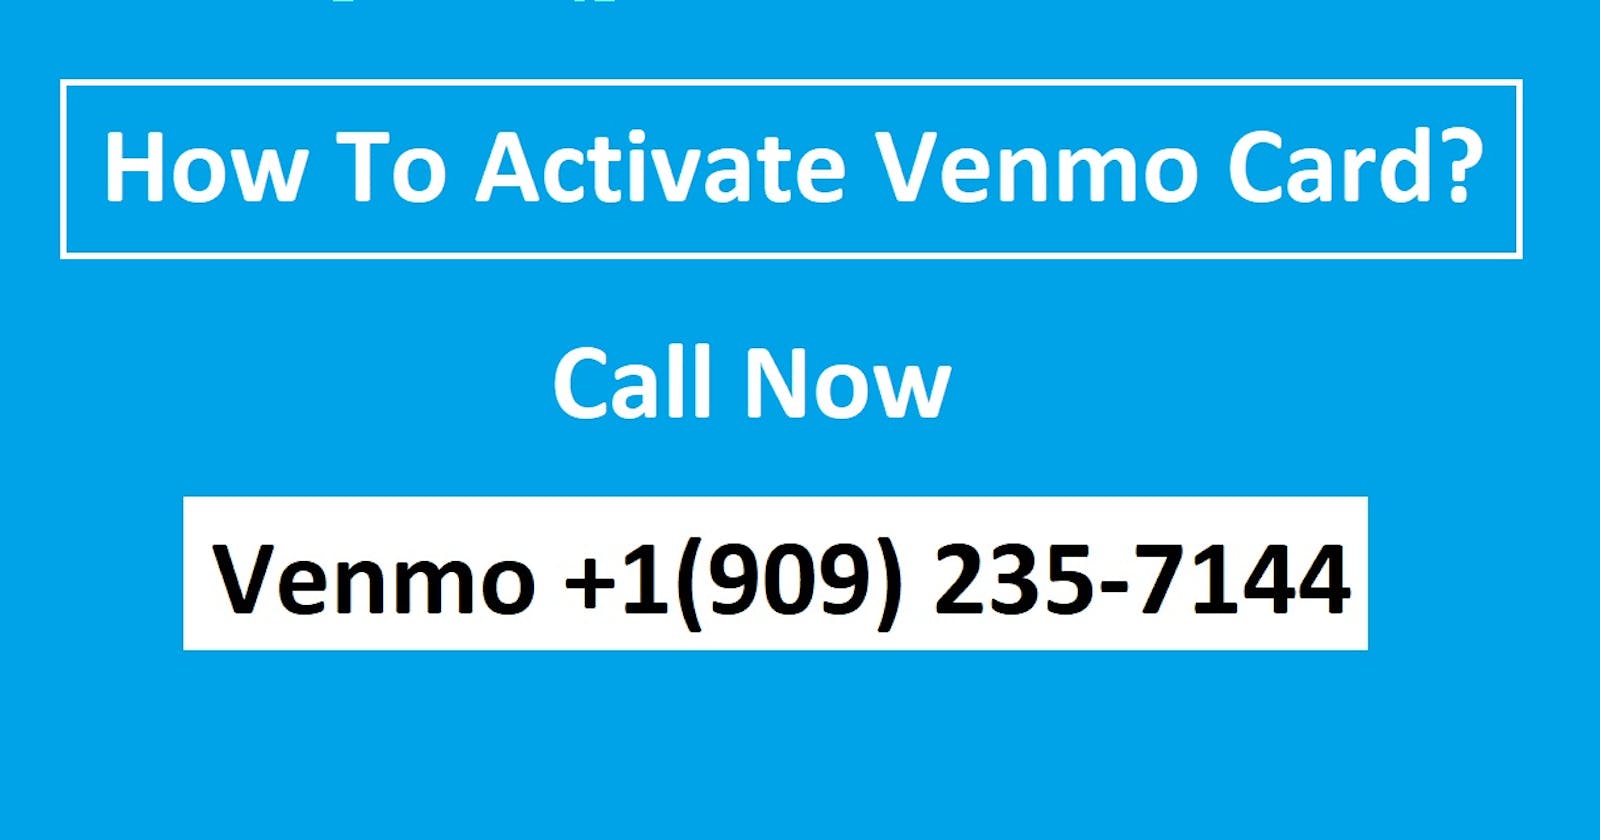 How To Activate Venmo Card?